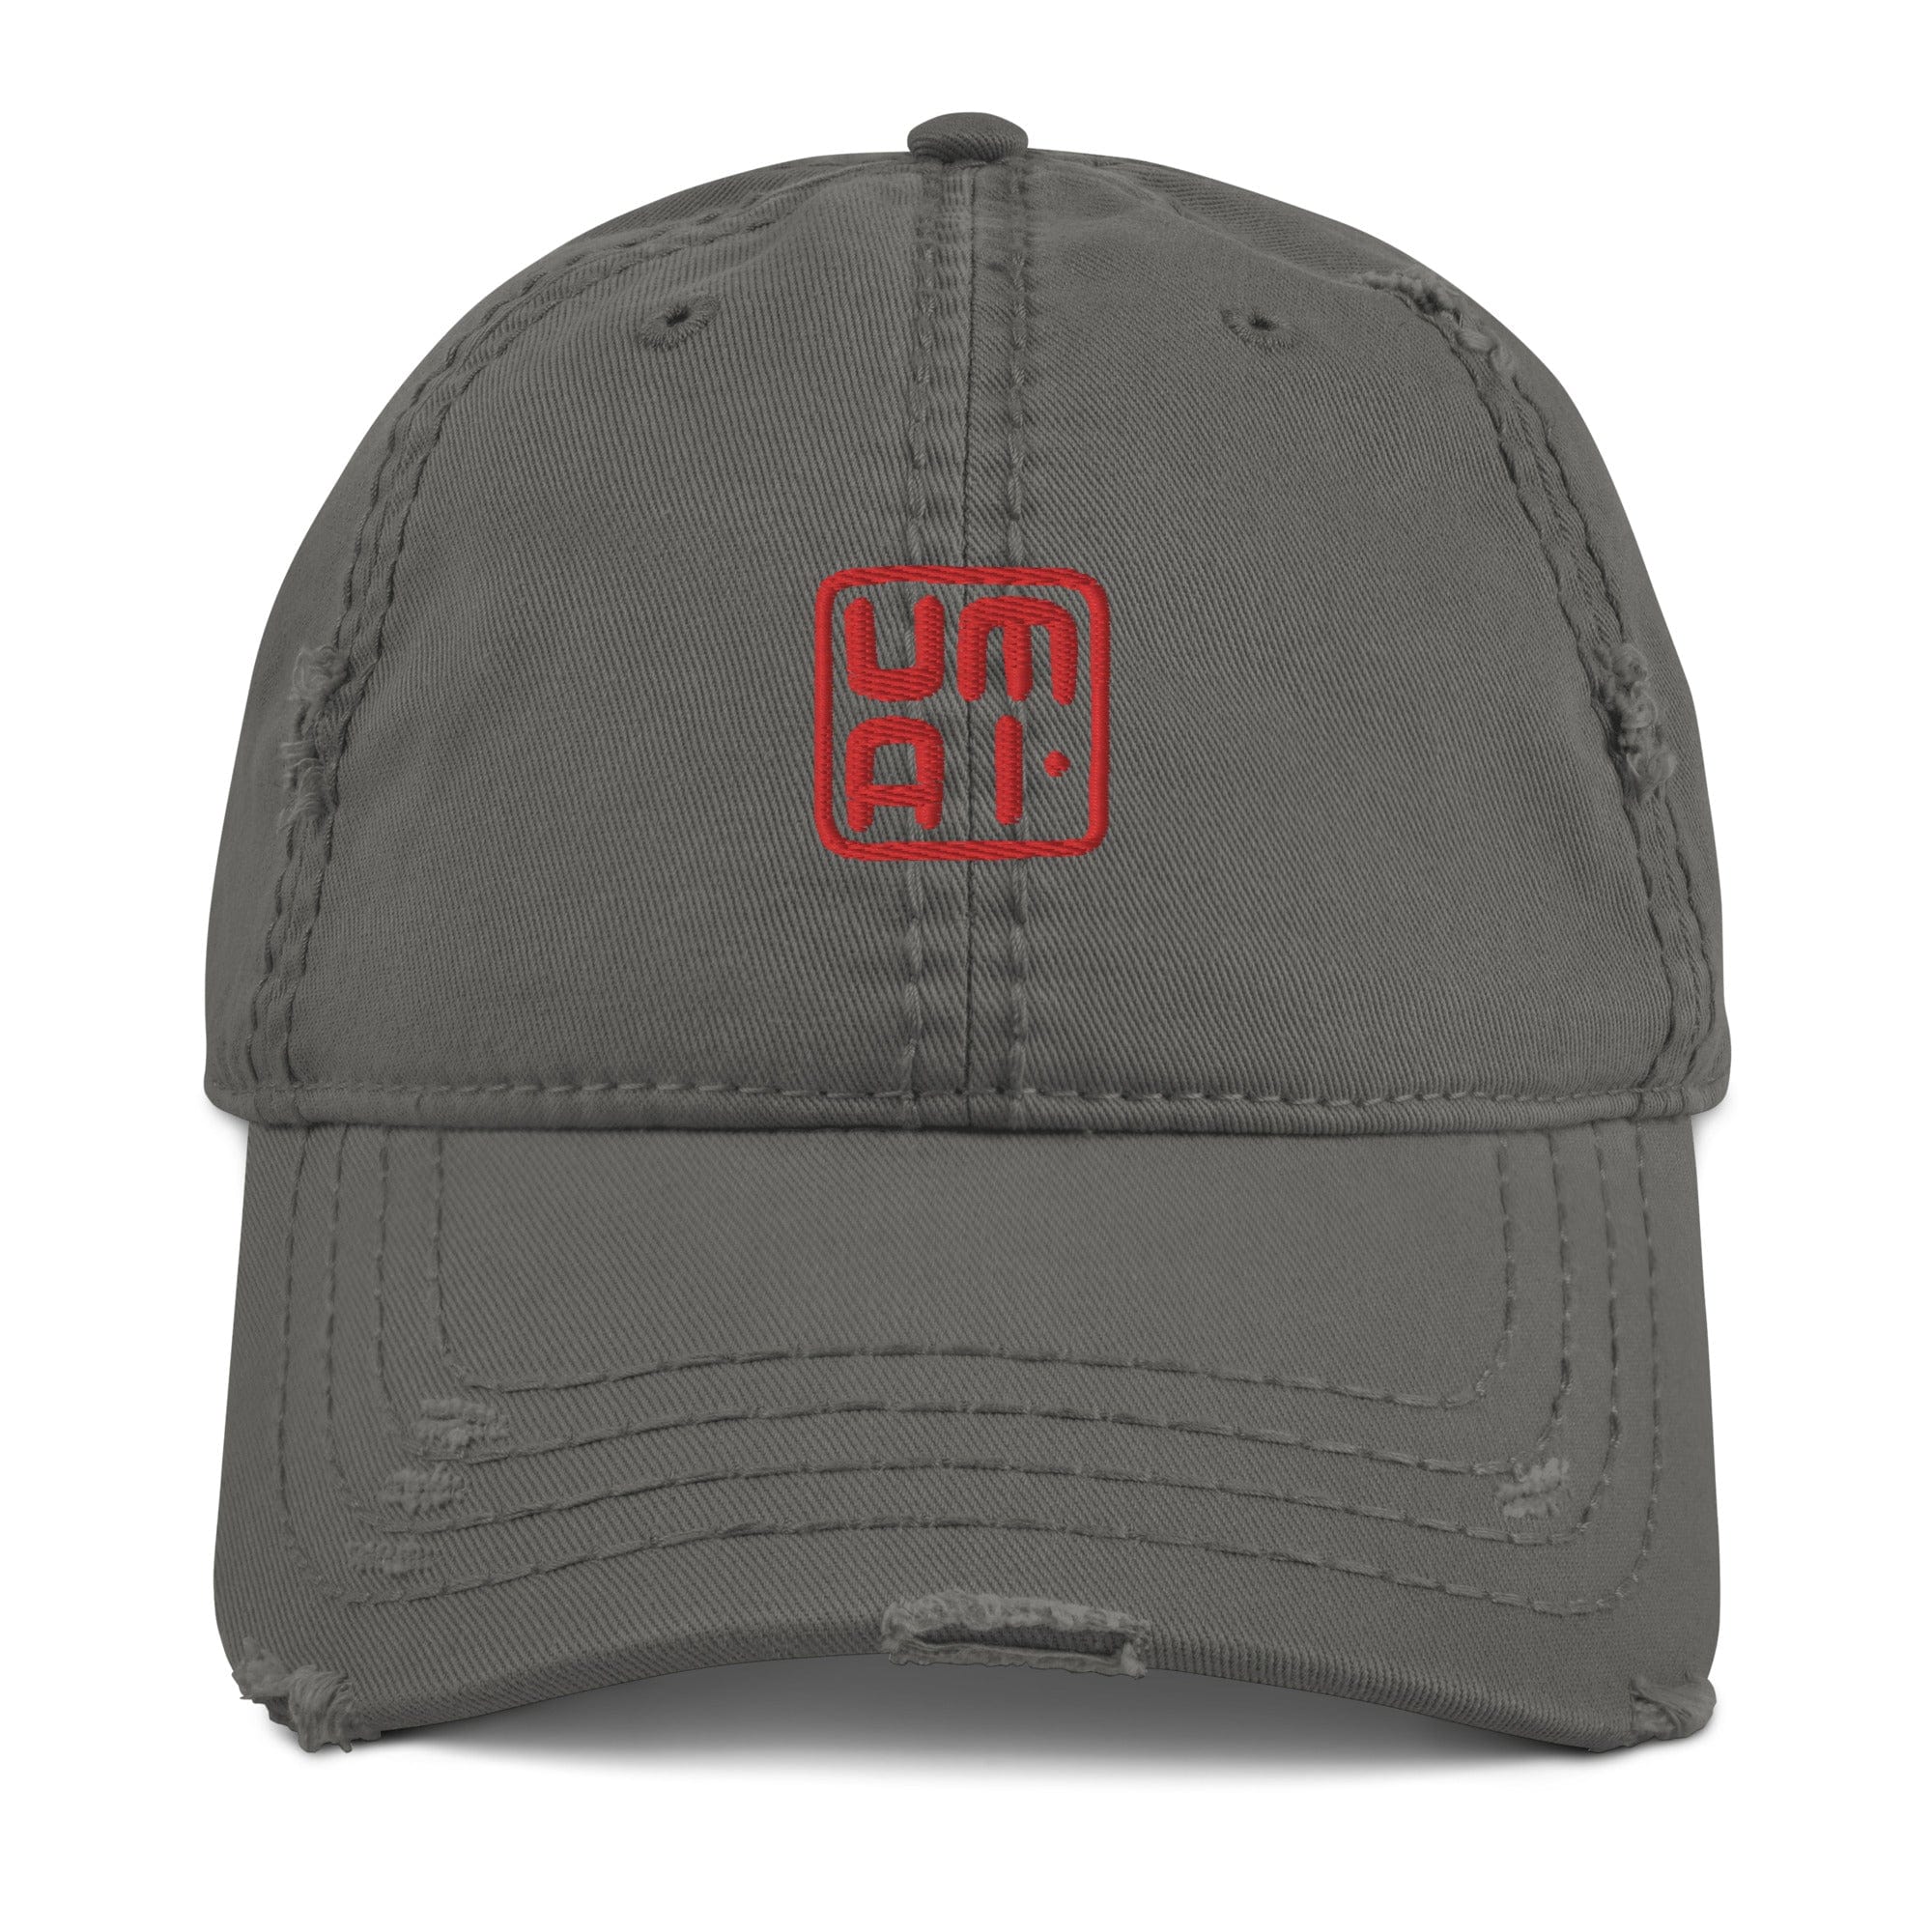 distressed-dad-hat-charcoal-grey-front-659171c5bf03d.jpg